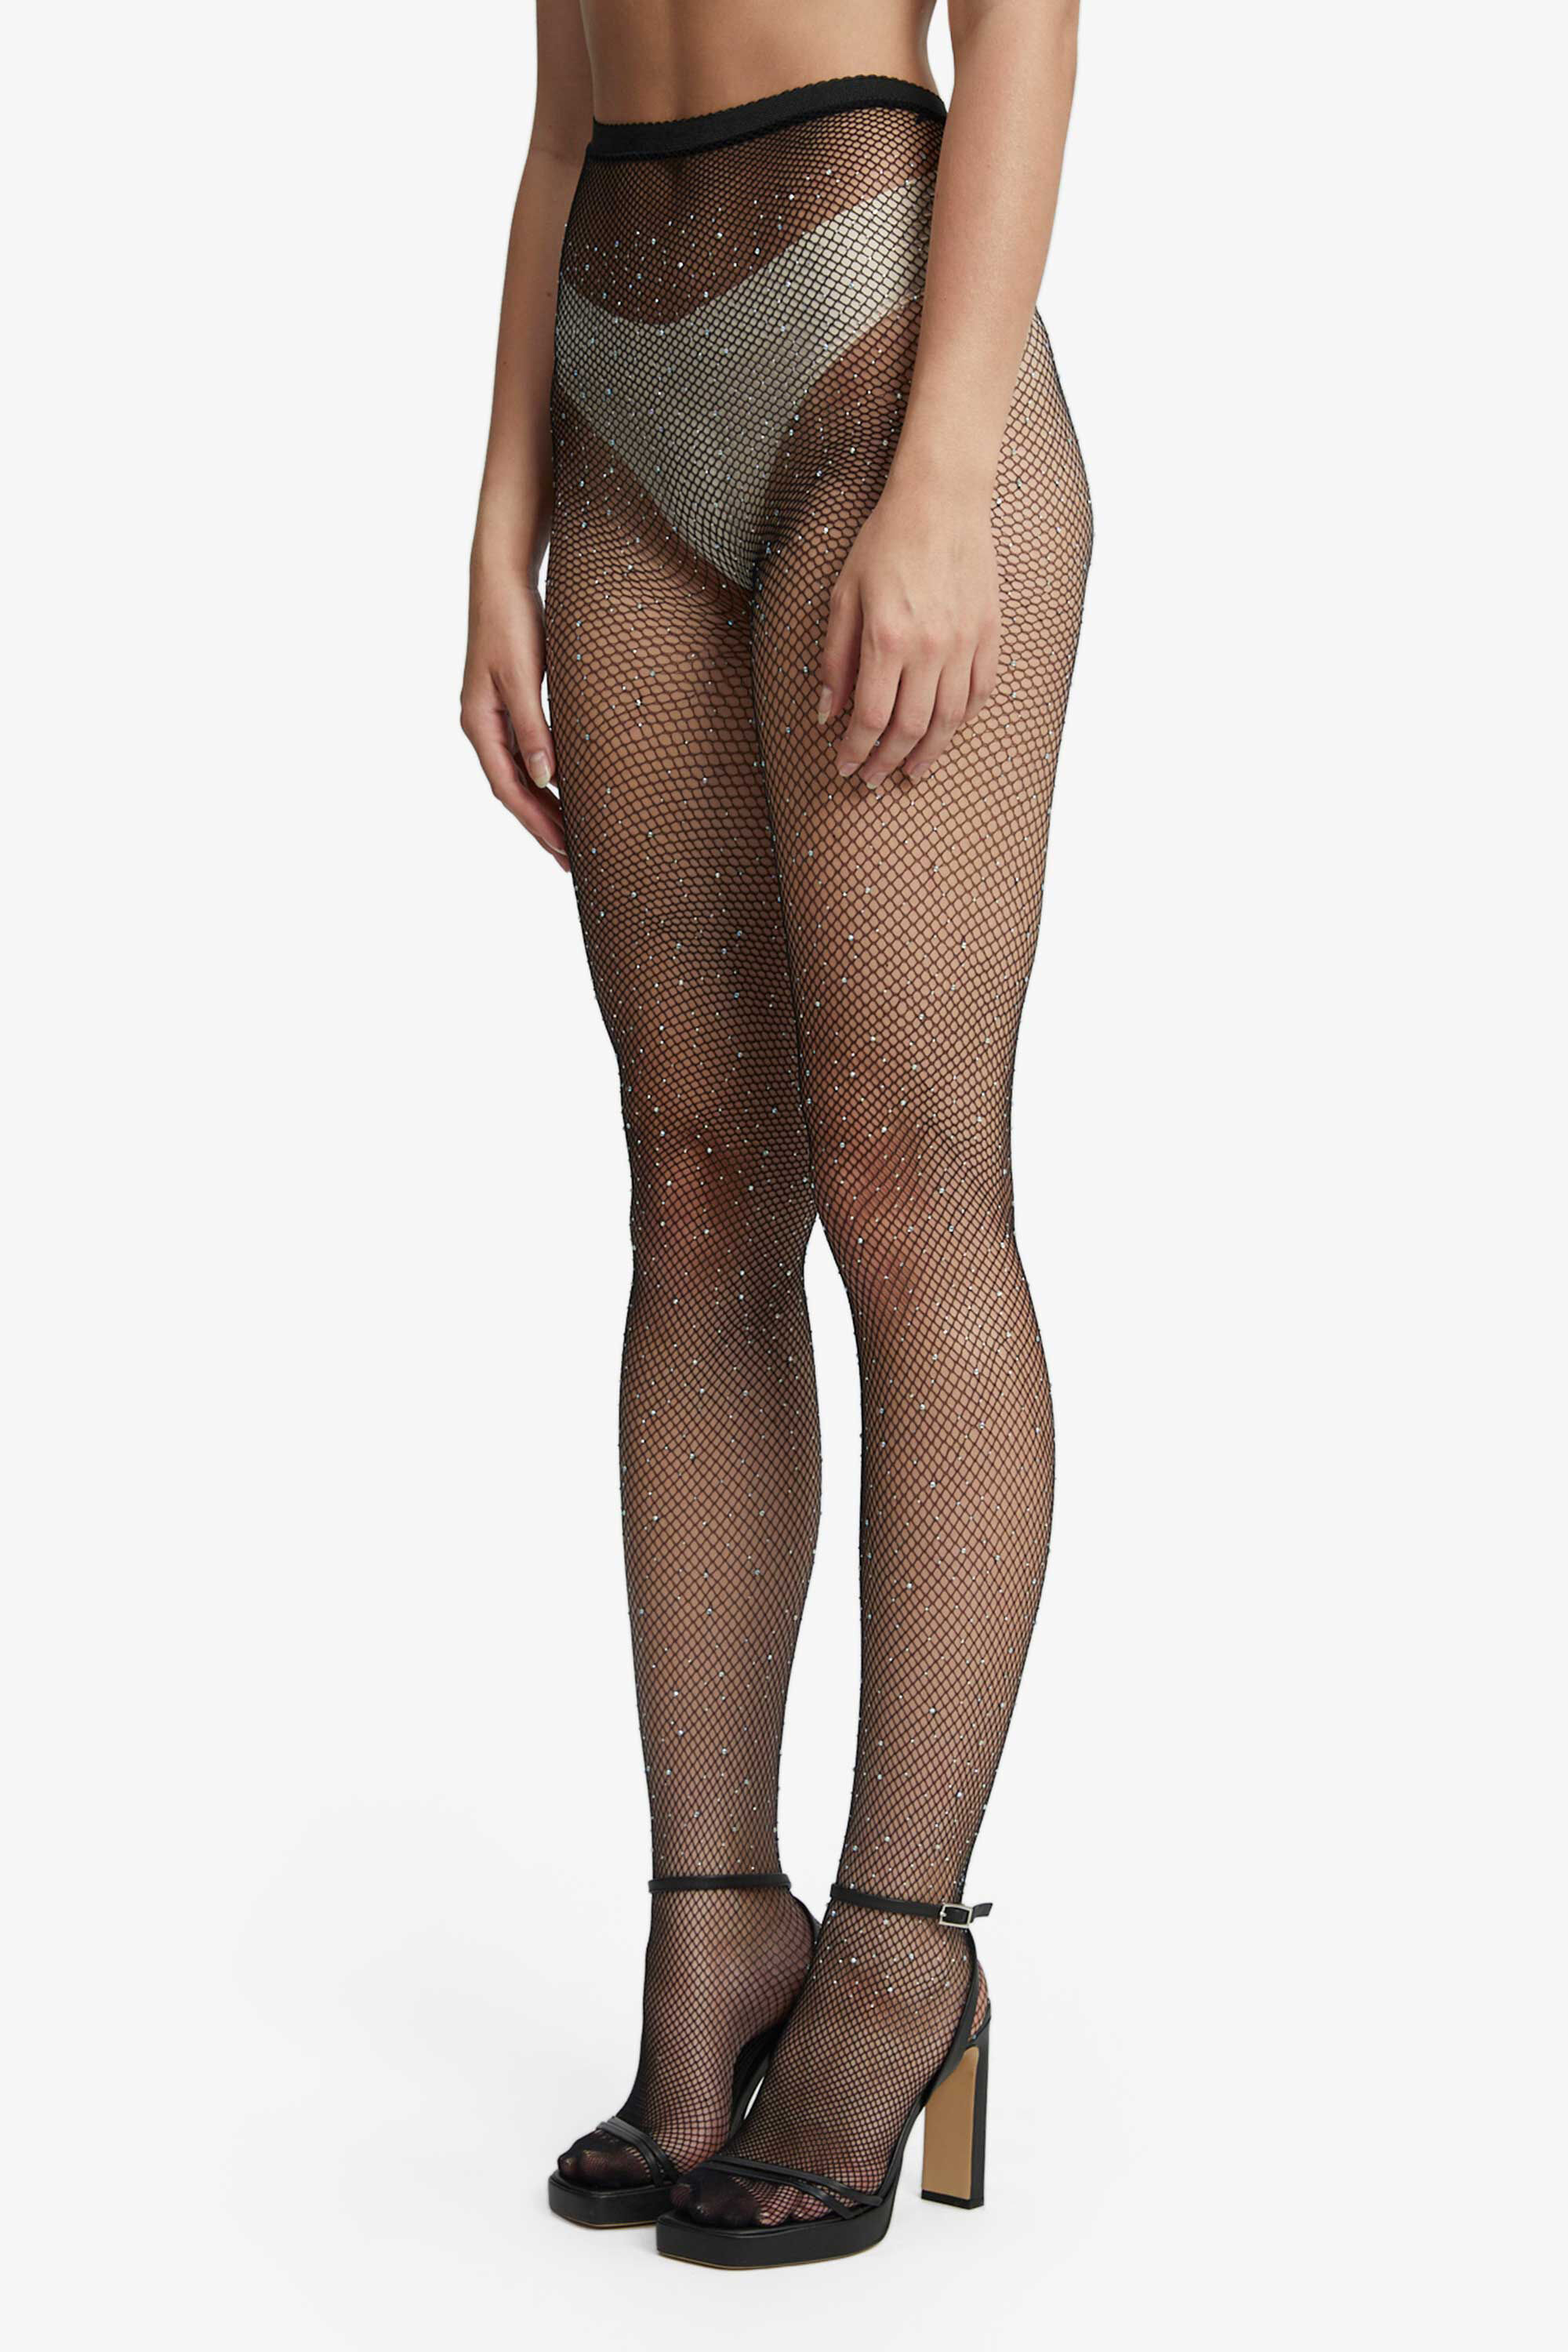 Women's Sequinned Diamante Fishnet Tights - Sexy Elastic Tights